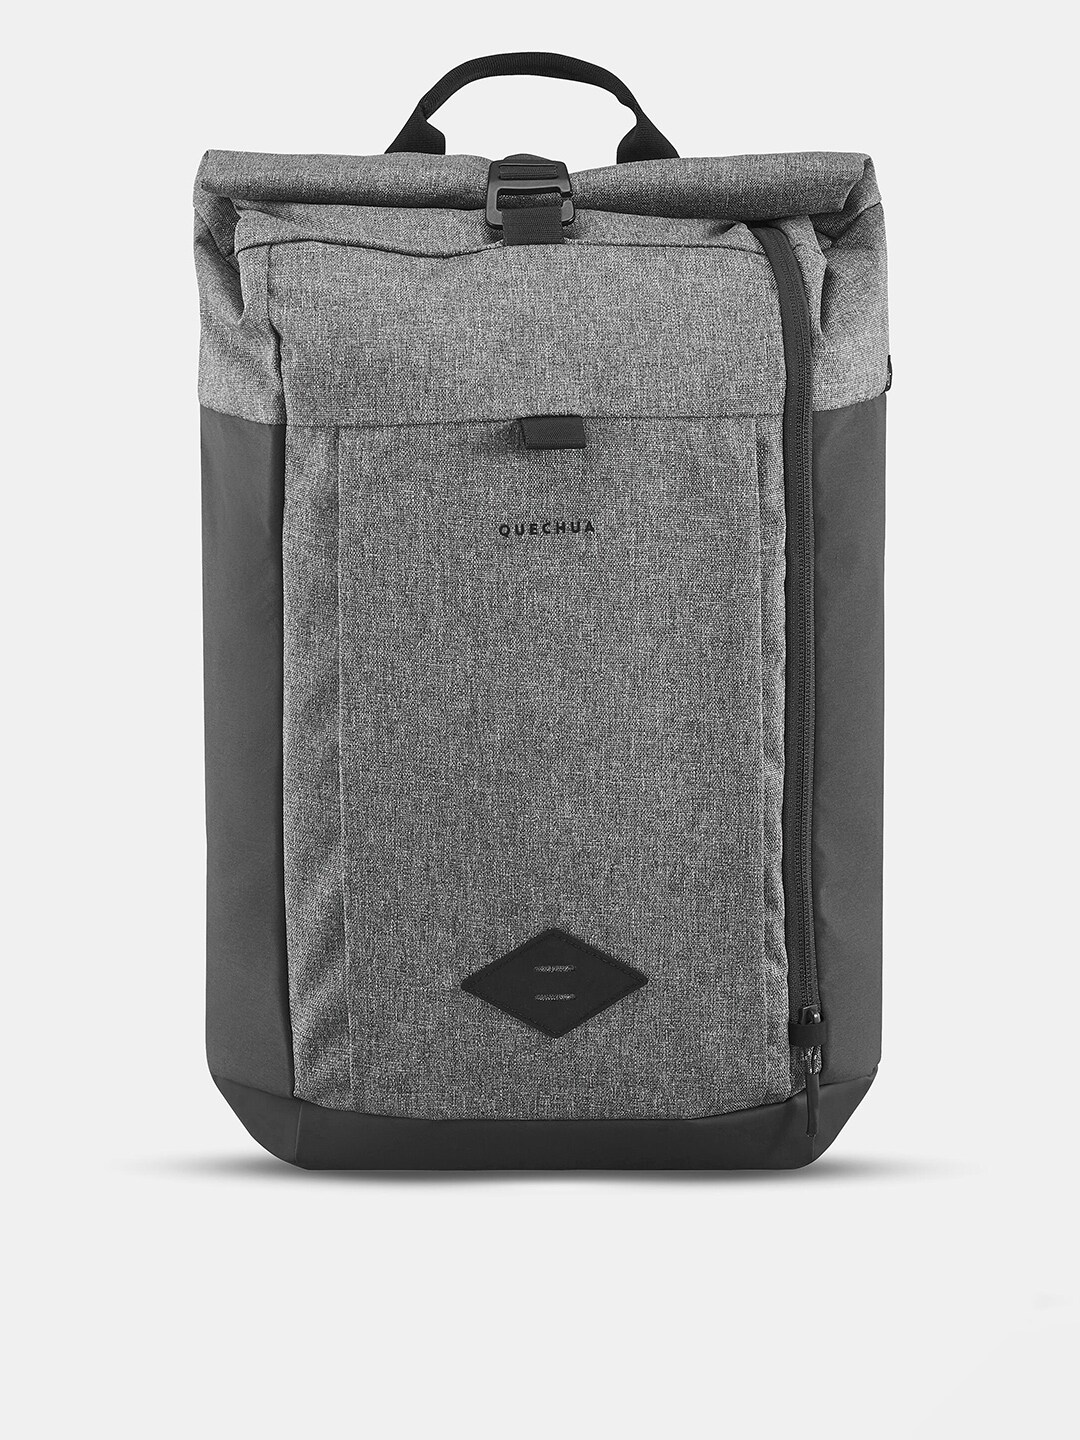 Quechua By Decathlon Unisex Grey Colourblocked Backpack Price in India